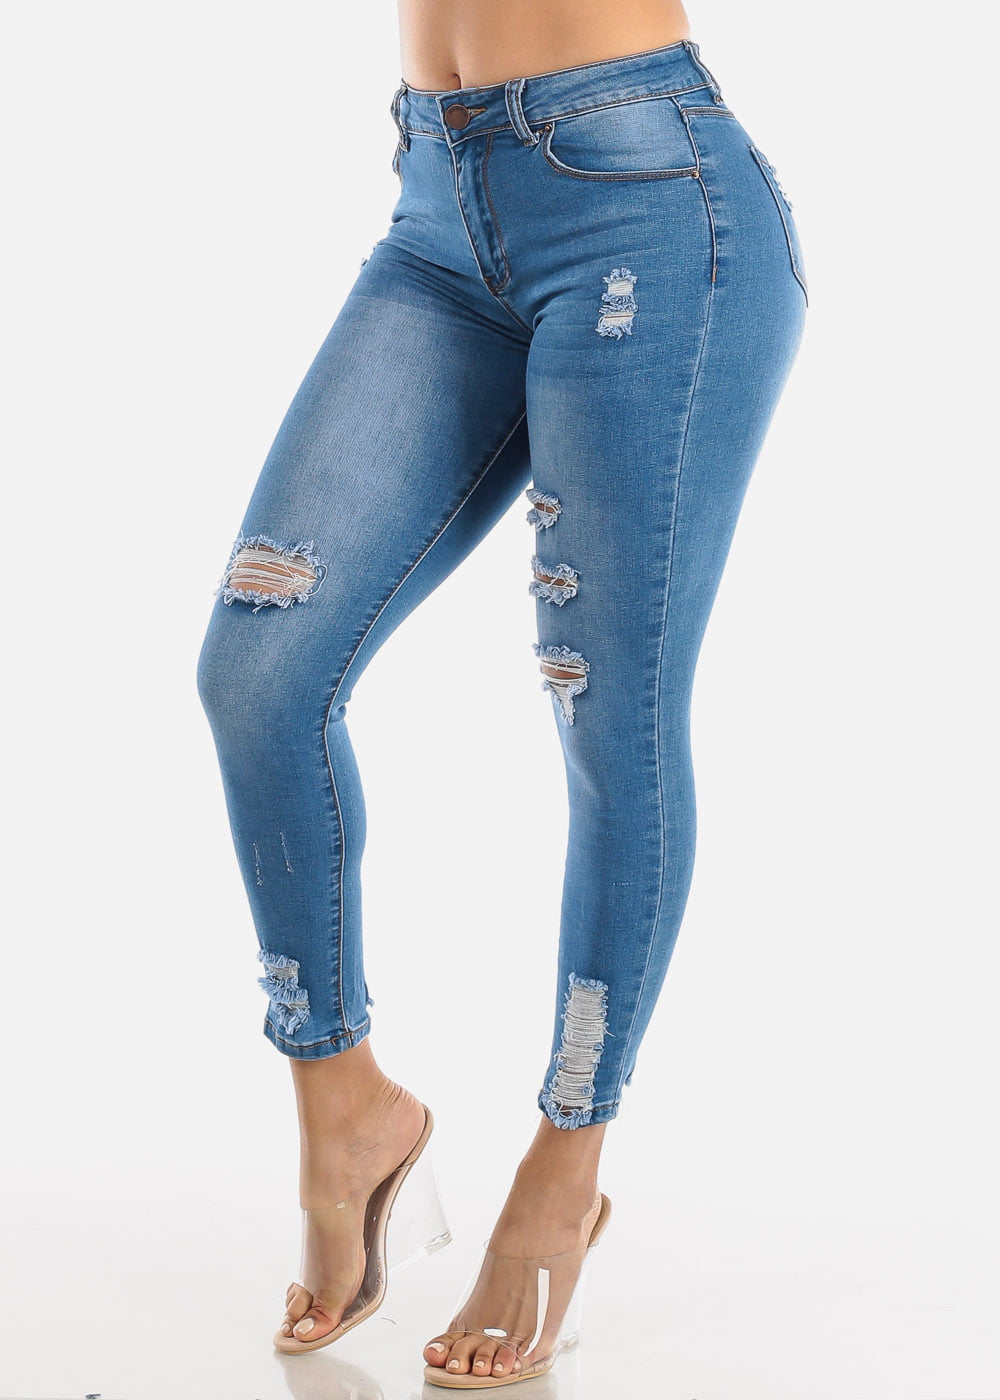 Moda Xpress - Womens Juniors High Waisted Skinny Jeans - Distressed ...